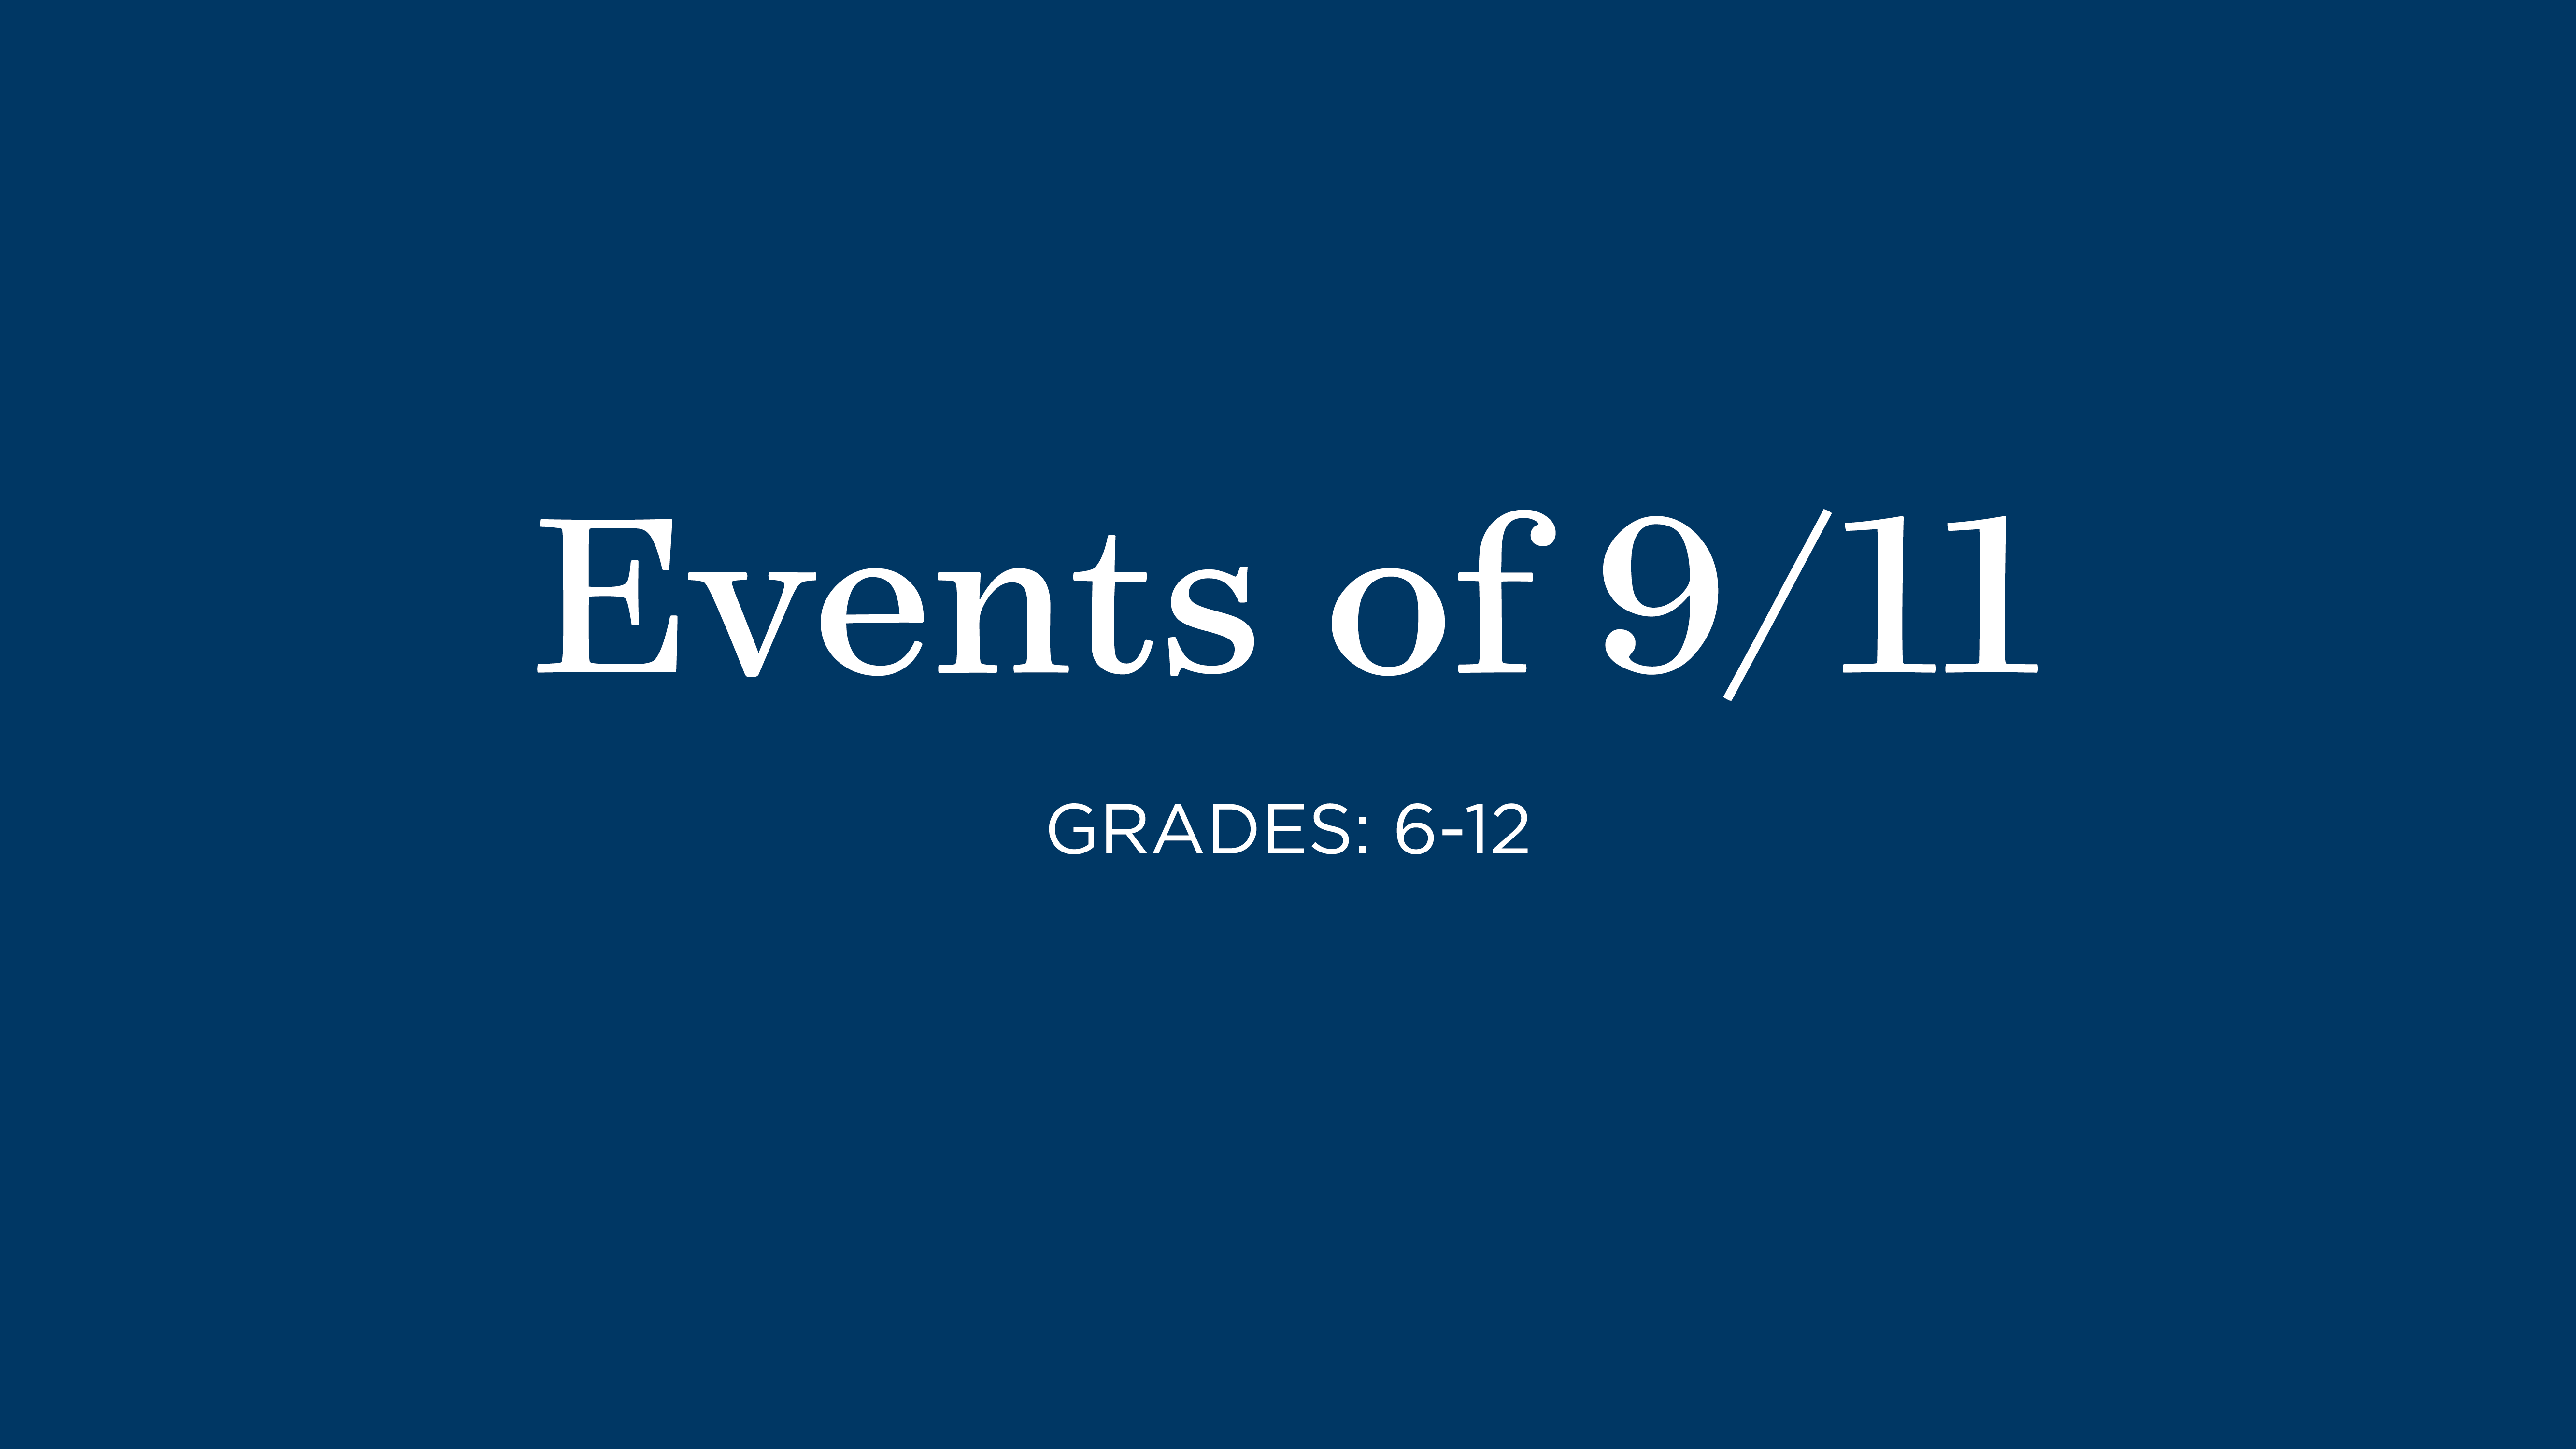 Text on Image - Events of 9/11 - Grades 6 to 12